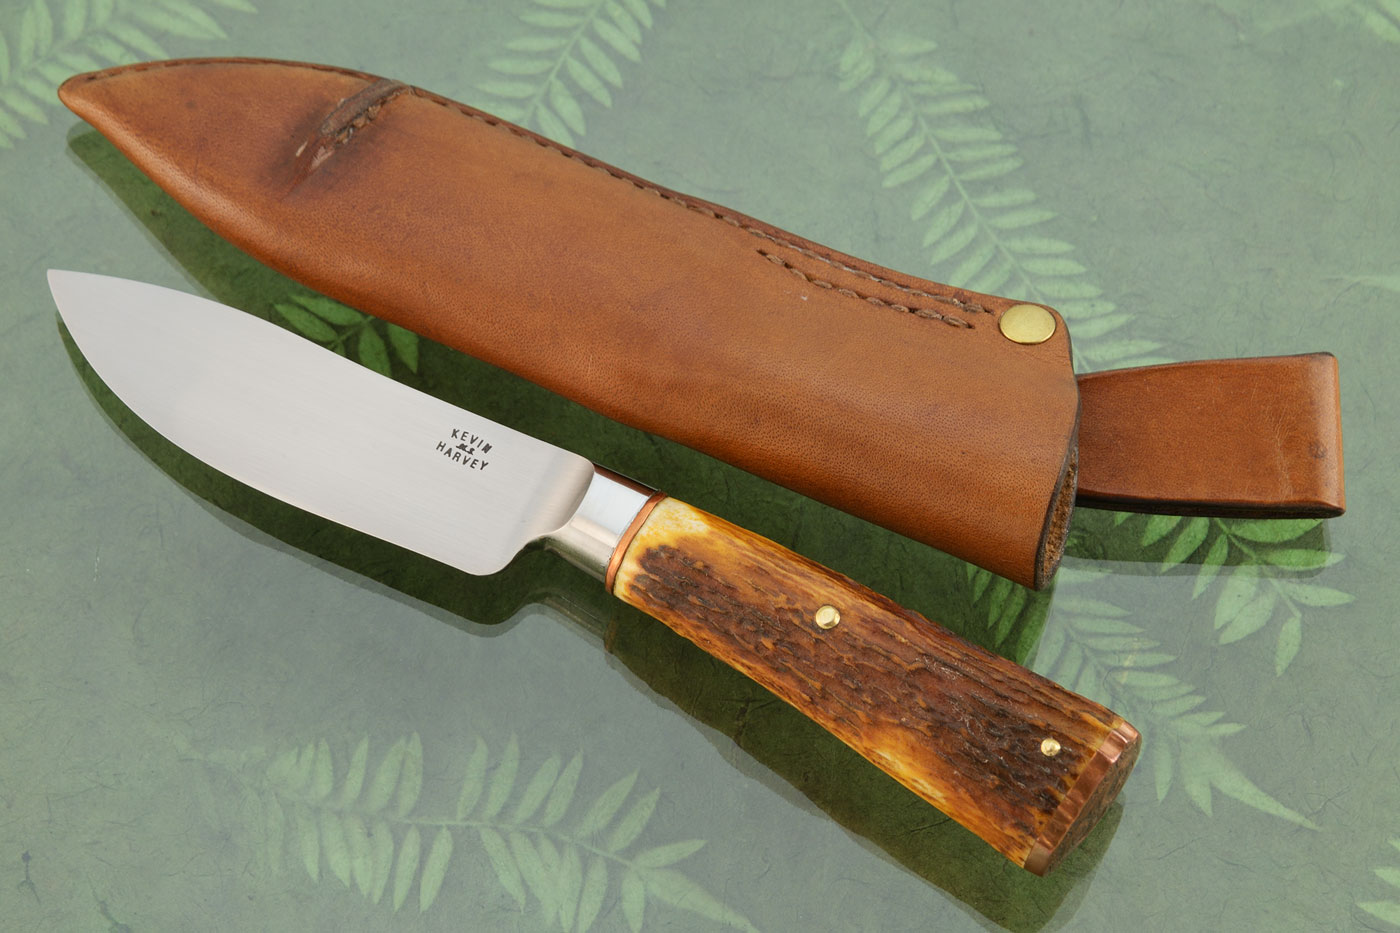 Integral Swayback Hunter with Stag and Scroll Engraving